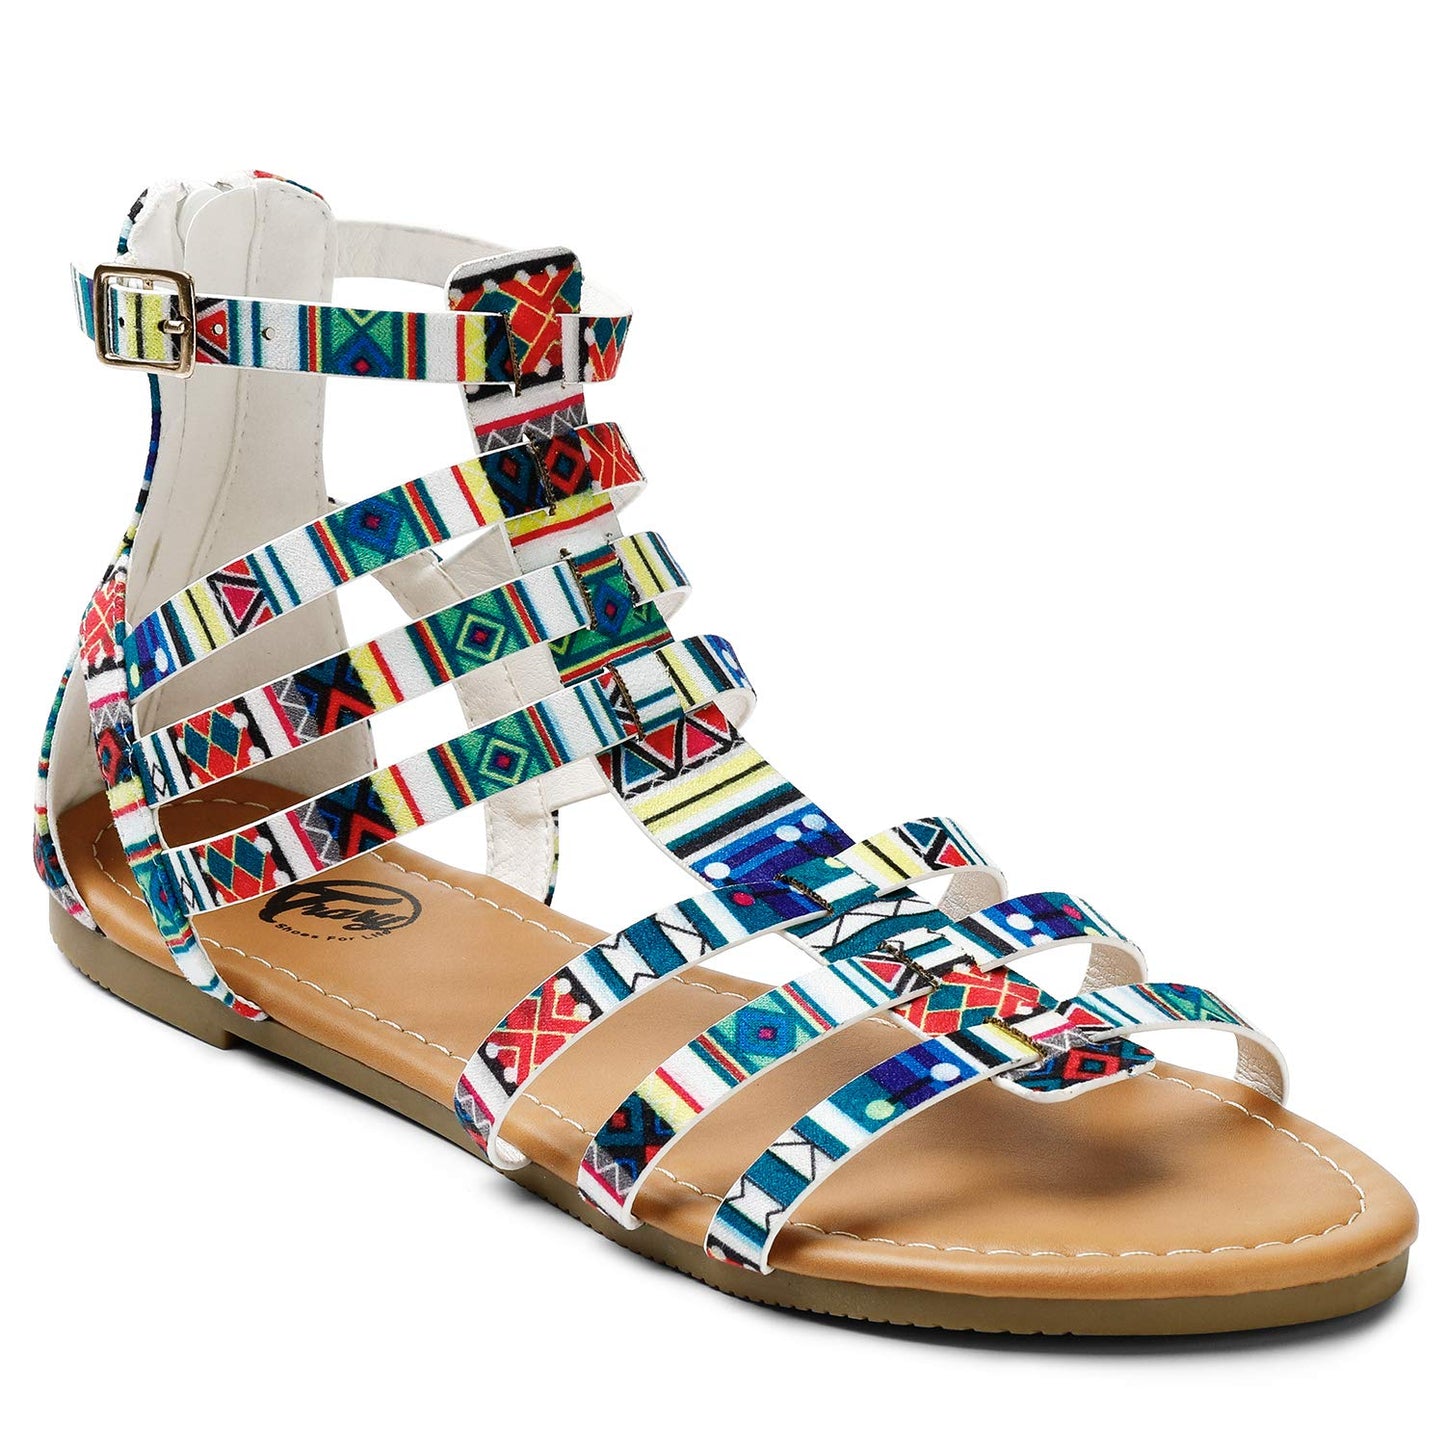 Trary Women's Sandal, Comfortable Gladiator Sandals Ankle Strap